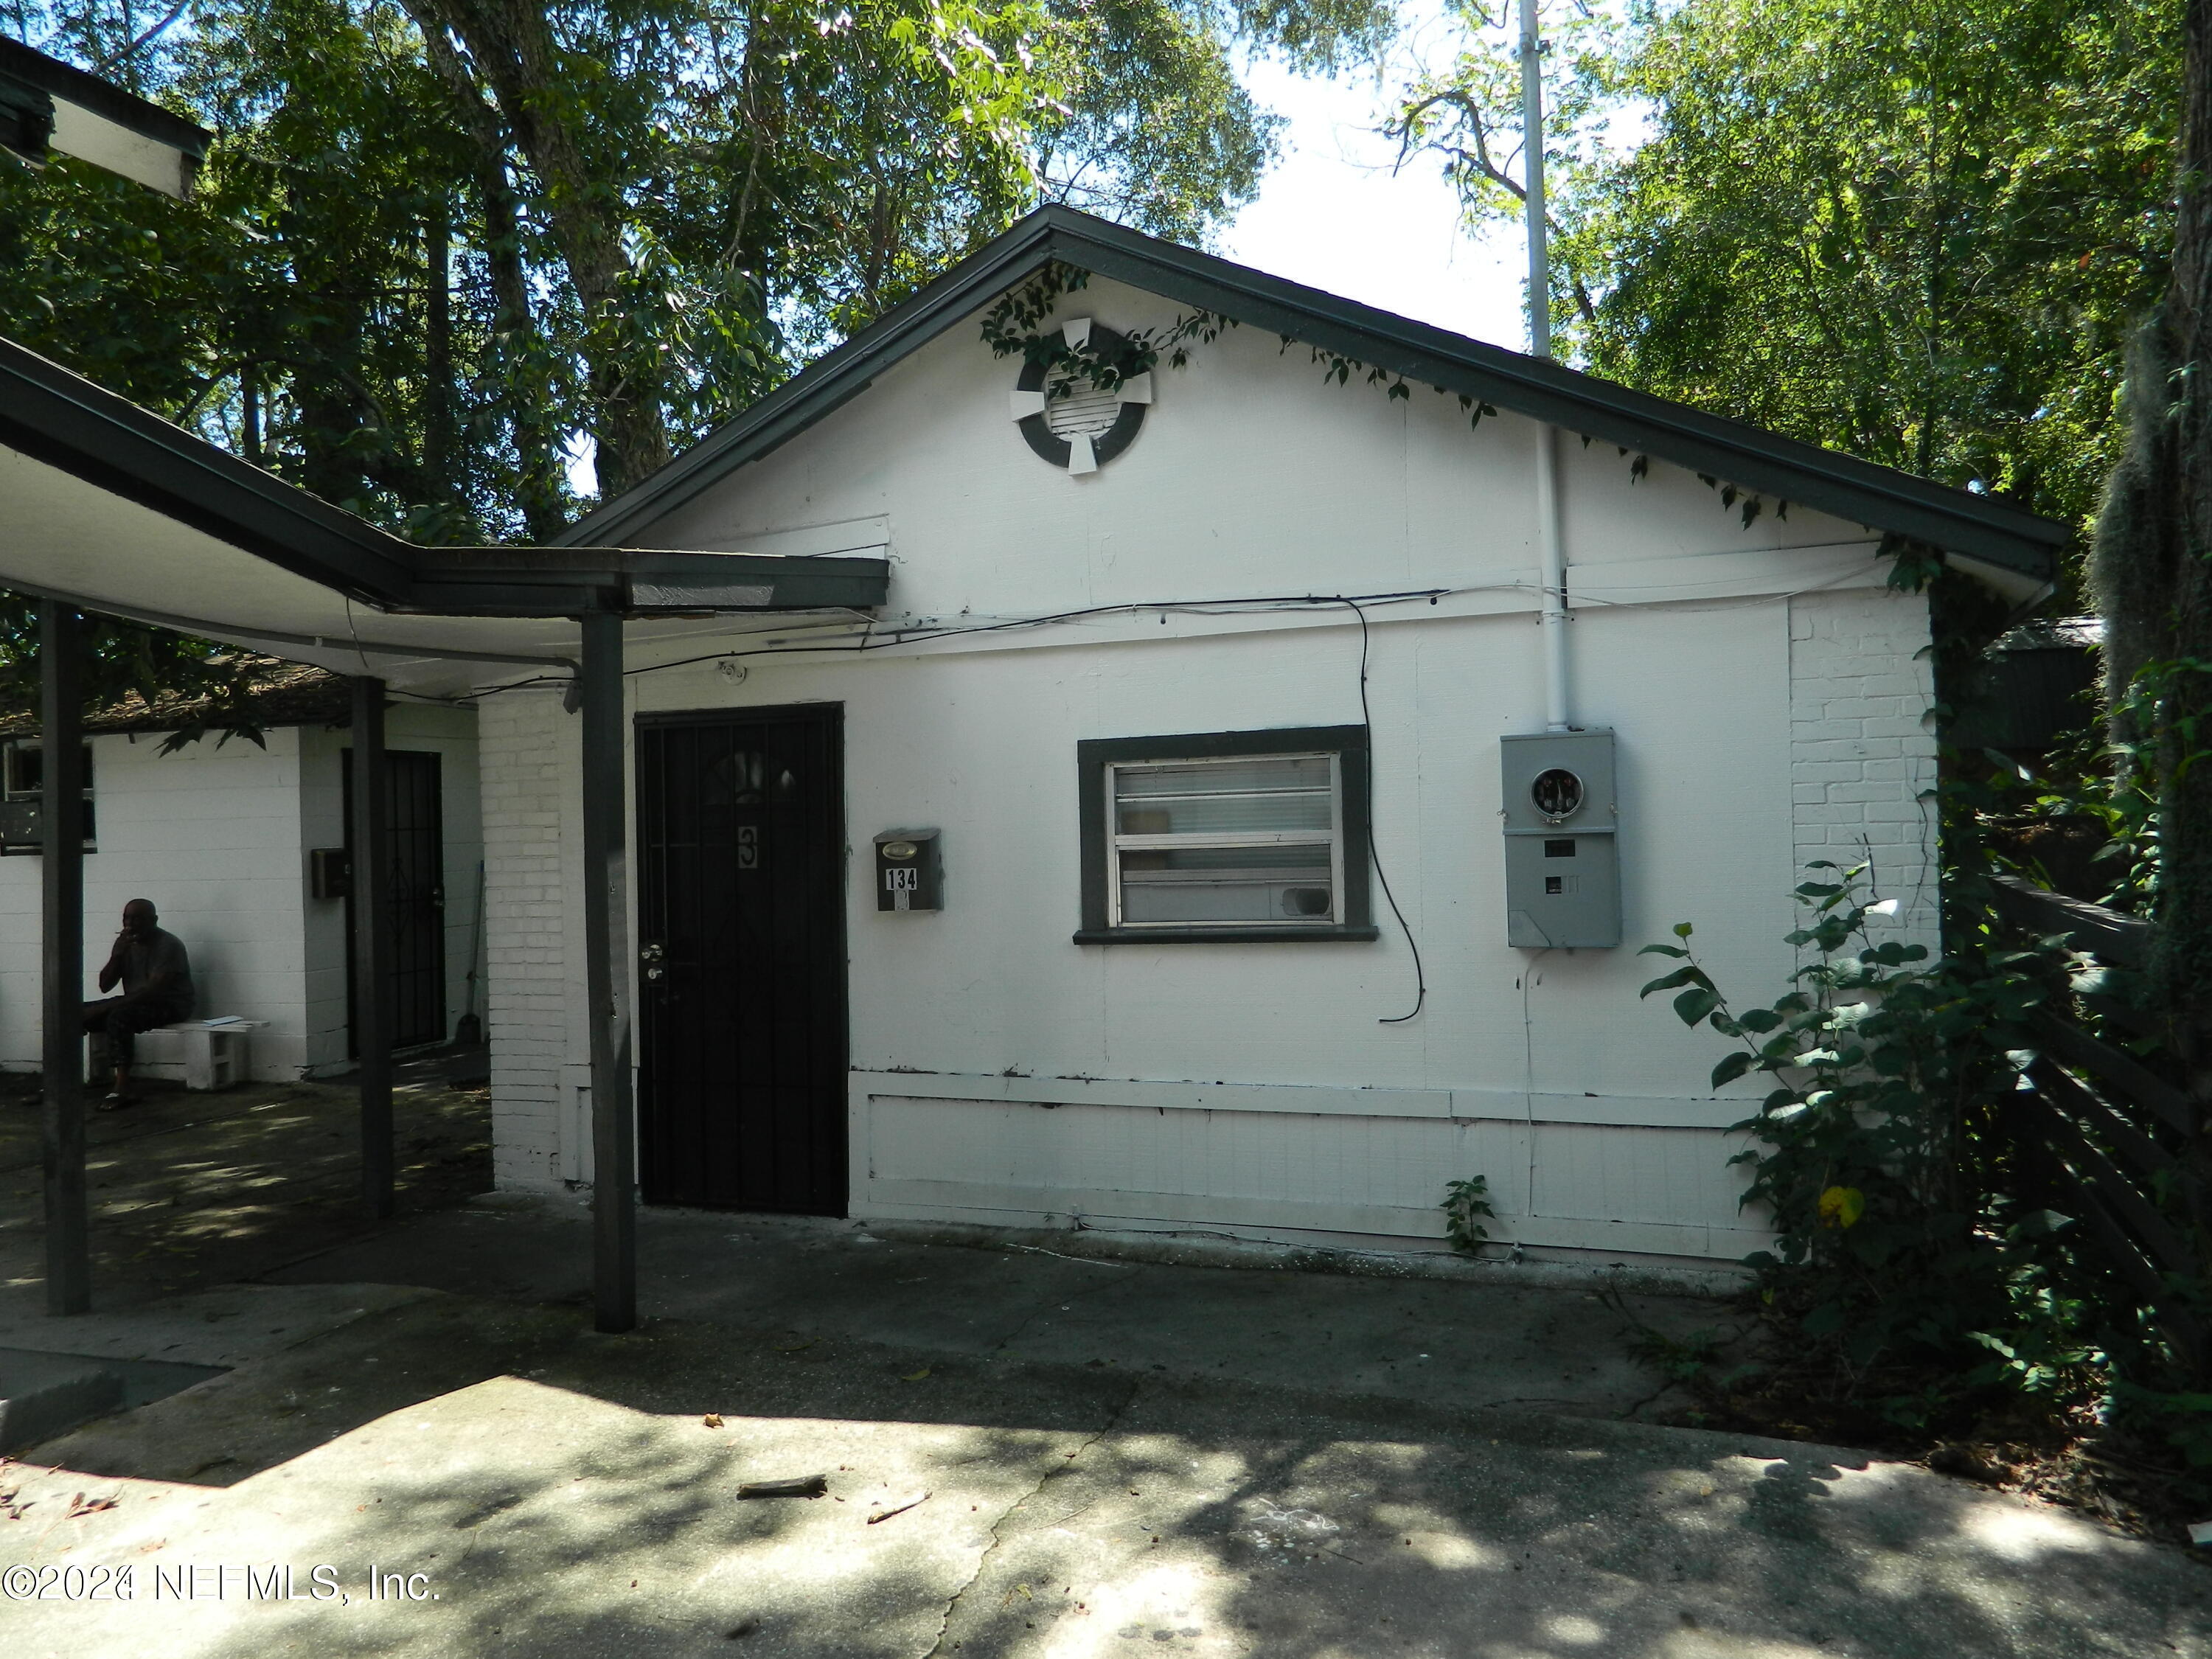 Jacksonville, FL home for sale located at 134 W 23rd Street Unit 3, Jacksonville, FL 32206